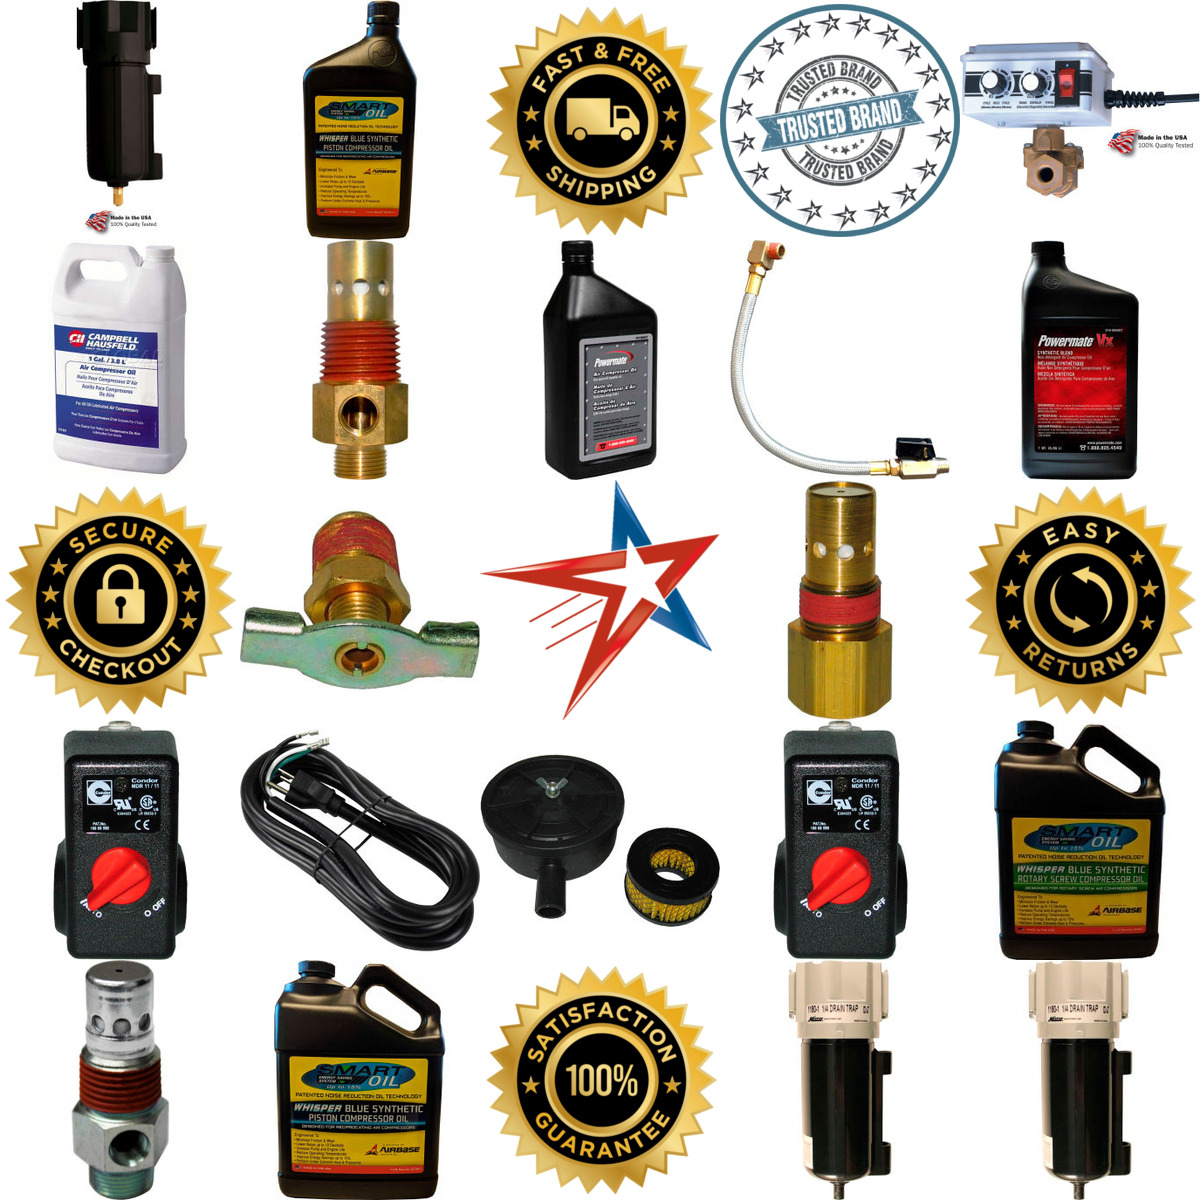 A selection of Compressor Parts and Accessories products on GoVets